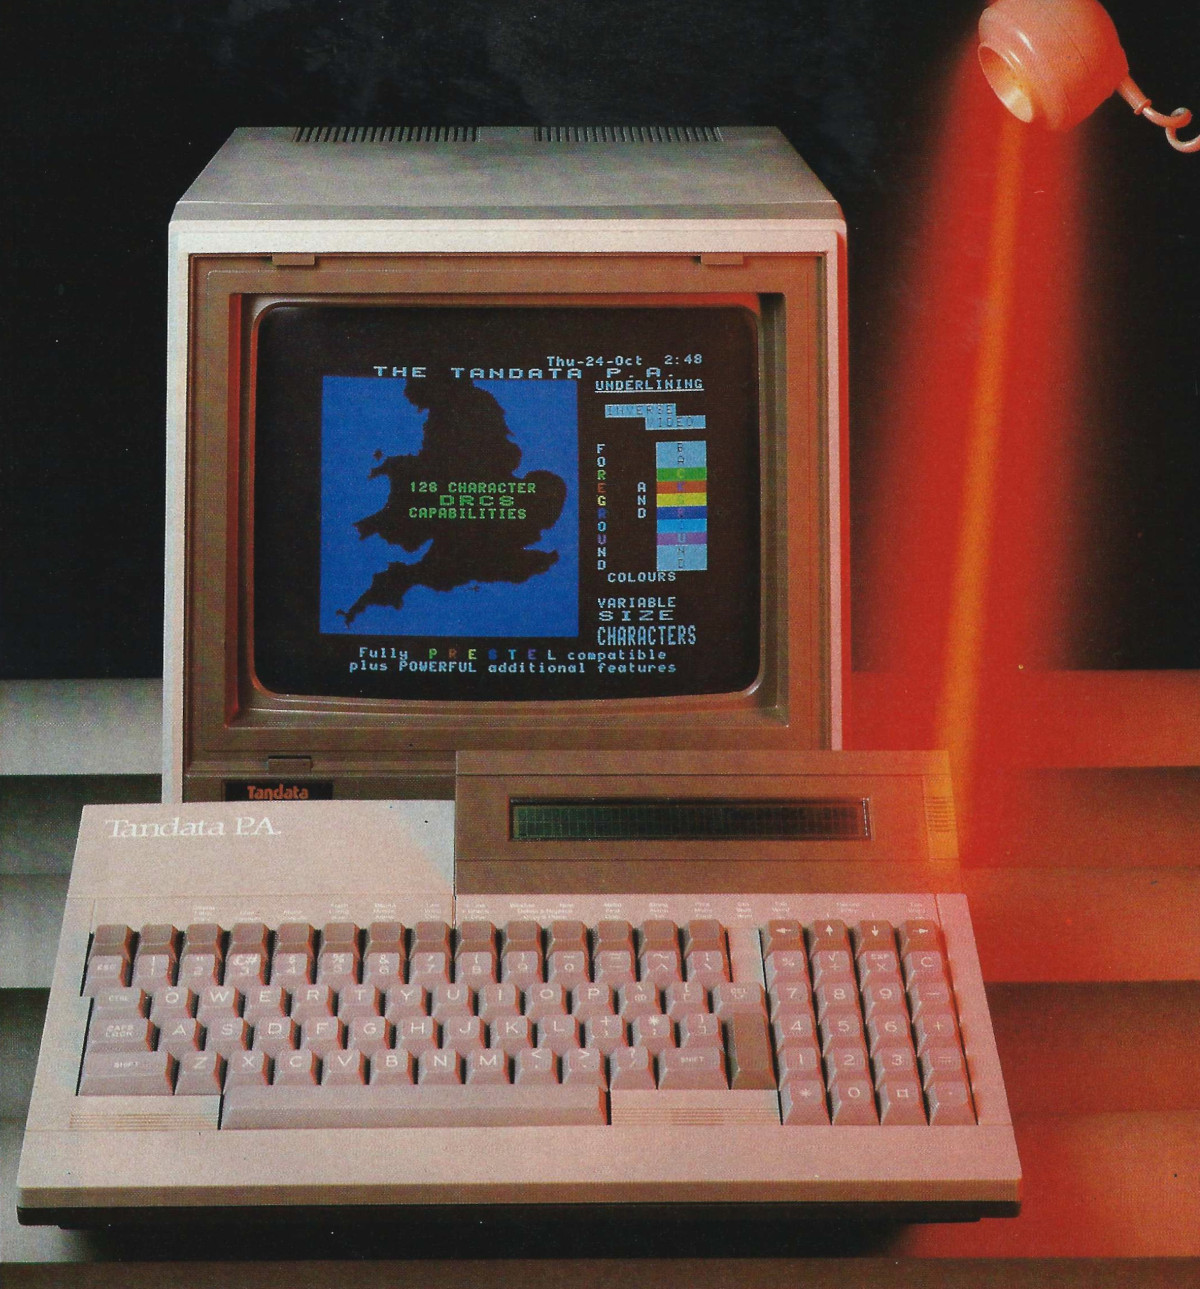 The Tandata PA, from Personal Computer World, January 1986